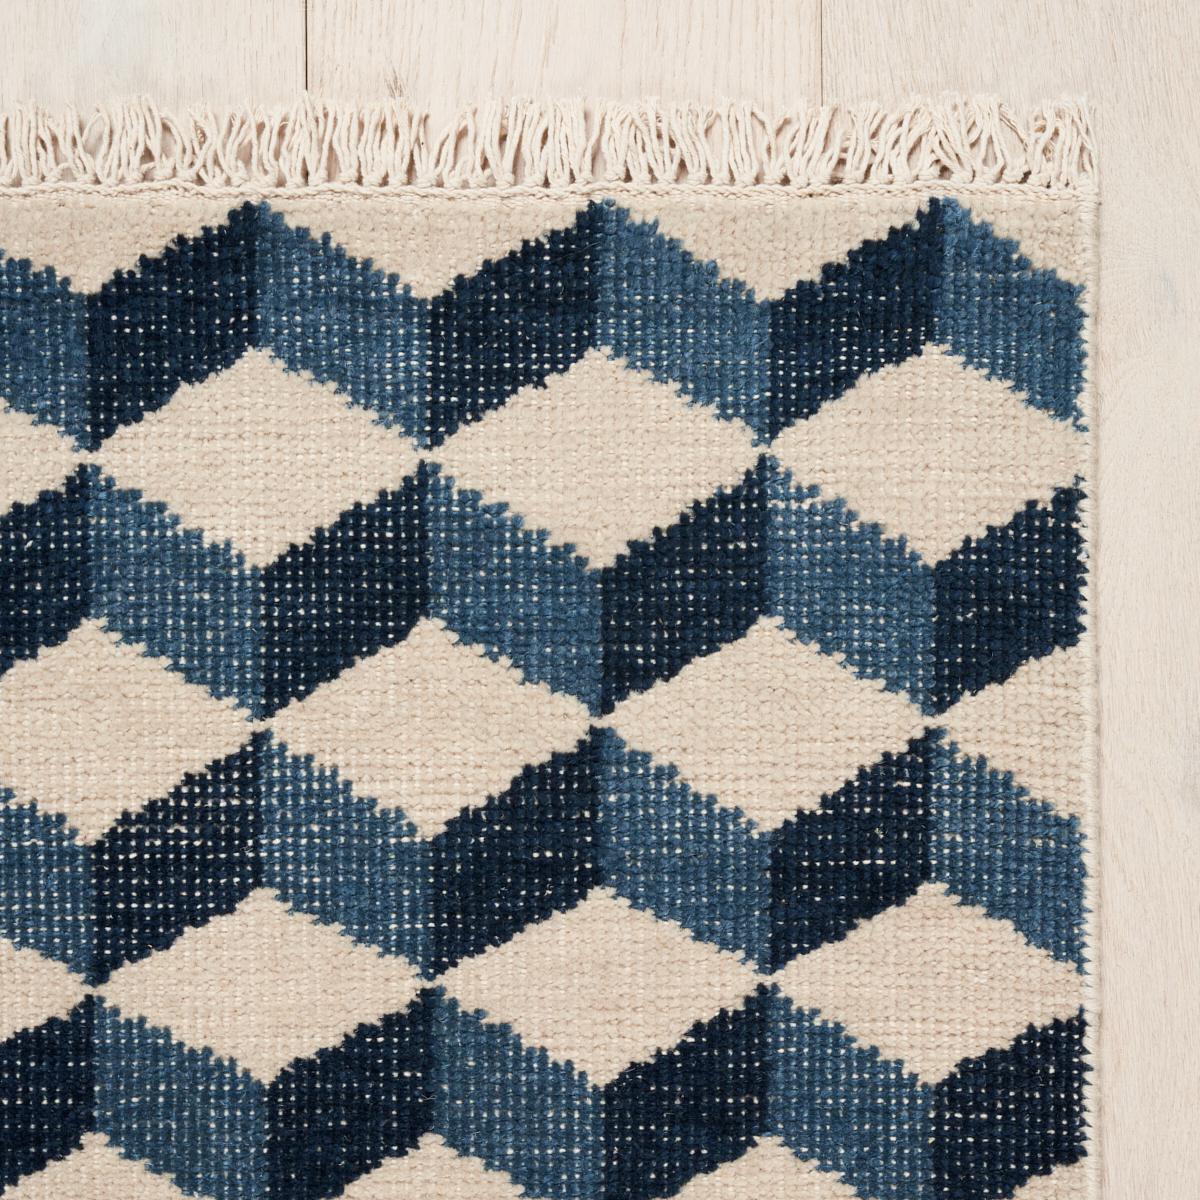 A timeless tumbling-block rug design, Pompeii features a versatile motif that is equally at home in modern and traditional interiors. With its graphic pattern, stylish fringe and soft wool pile, this hand-knotted rug looks as good as it feels.
